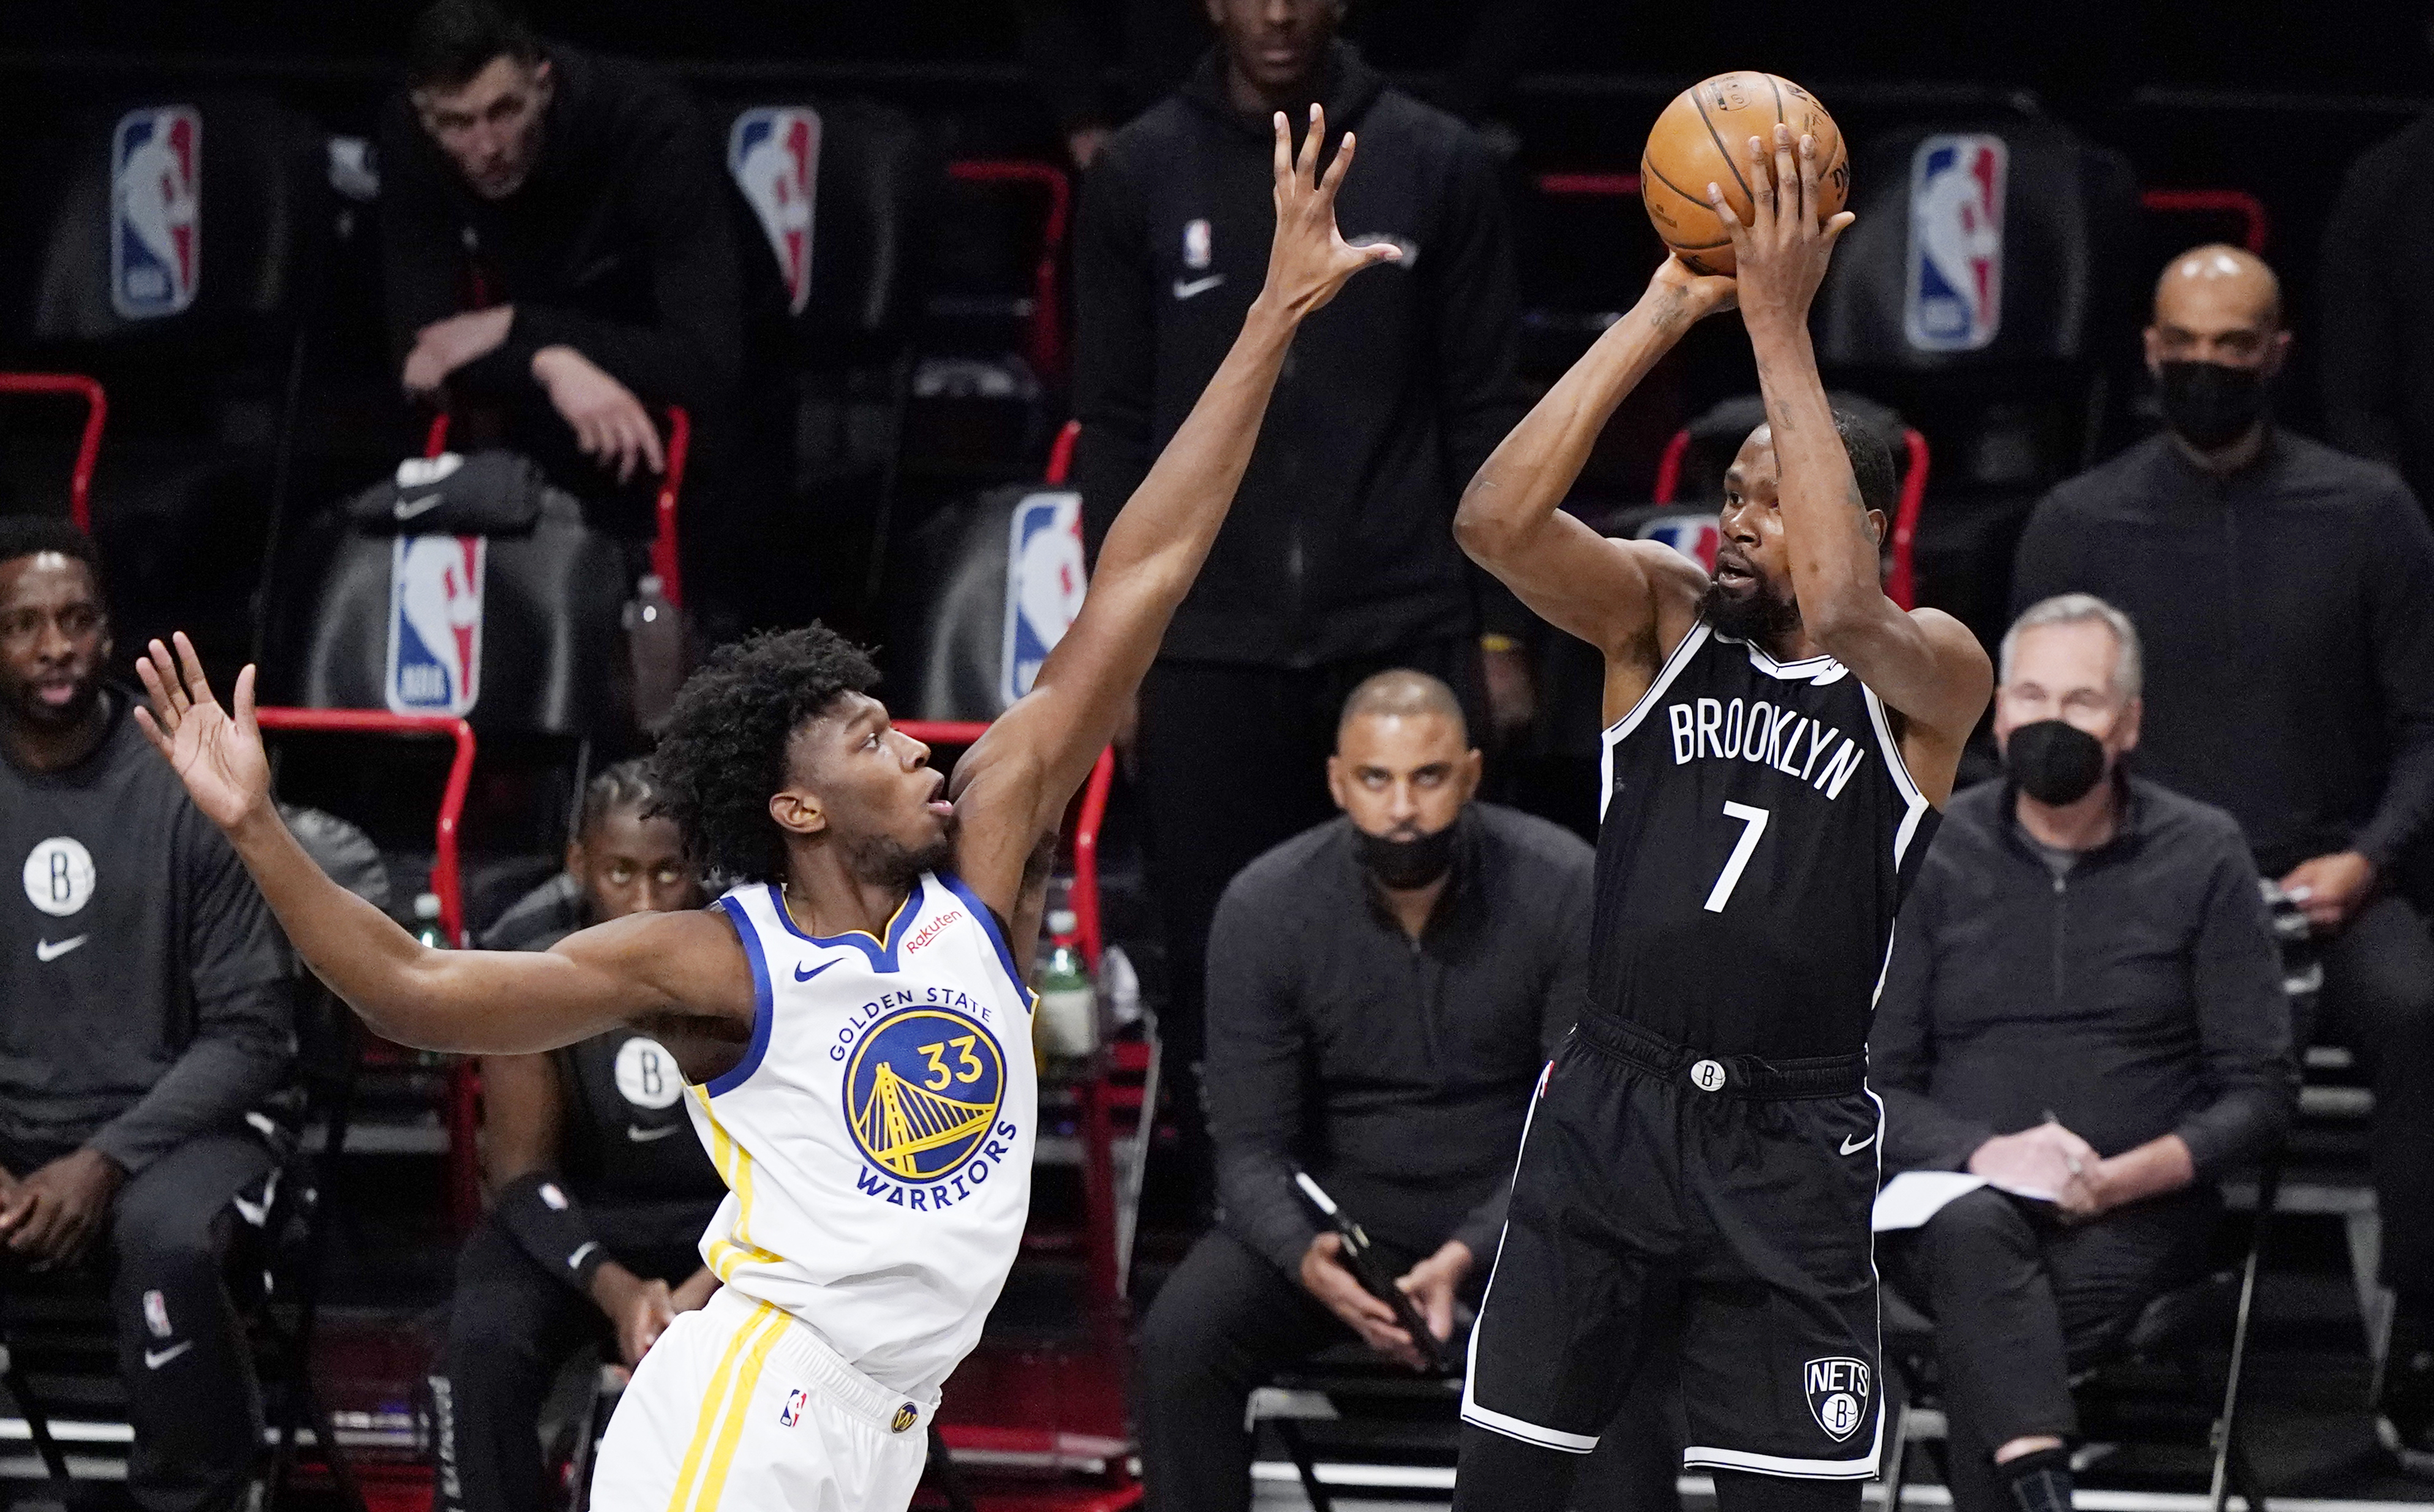 Golden State Warriors: Comparing James Wiseman to other rookies